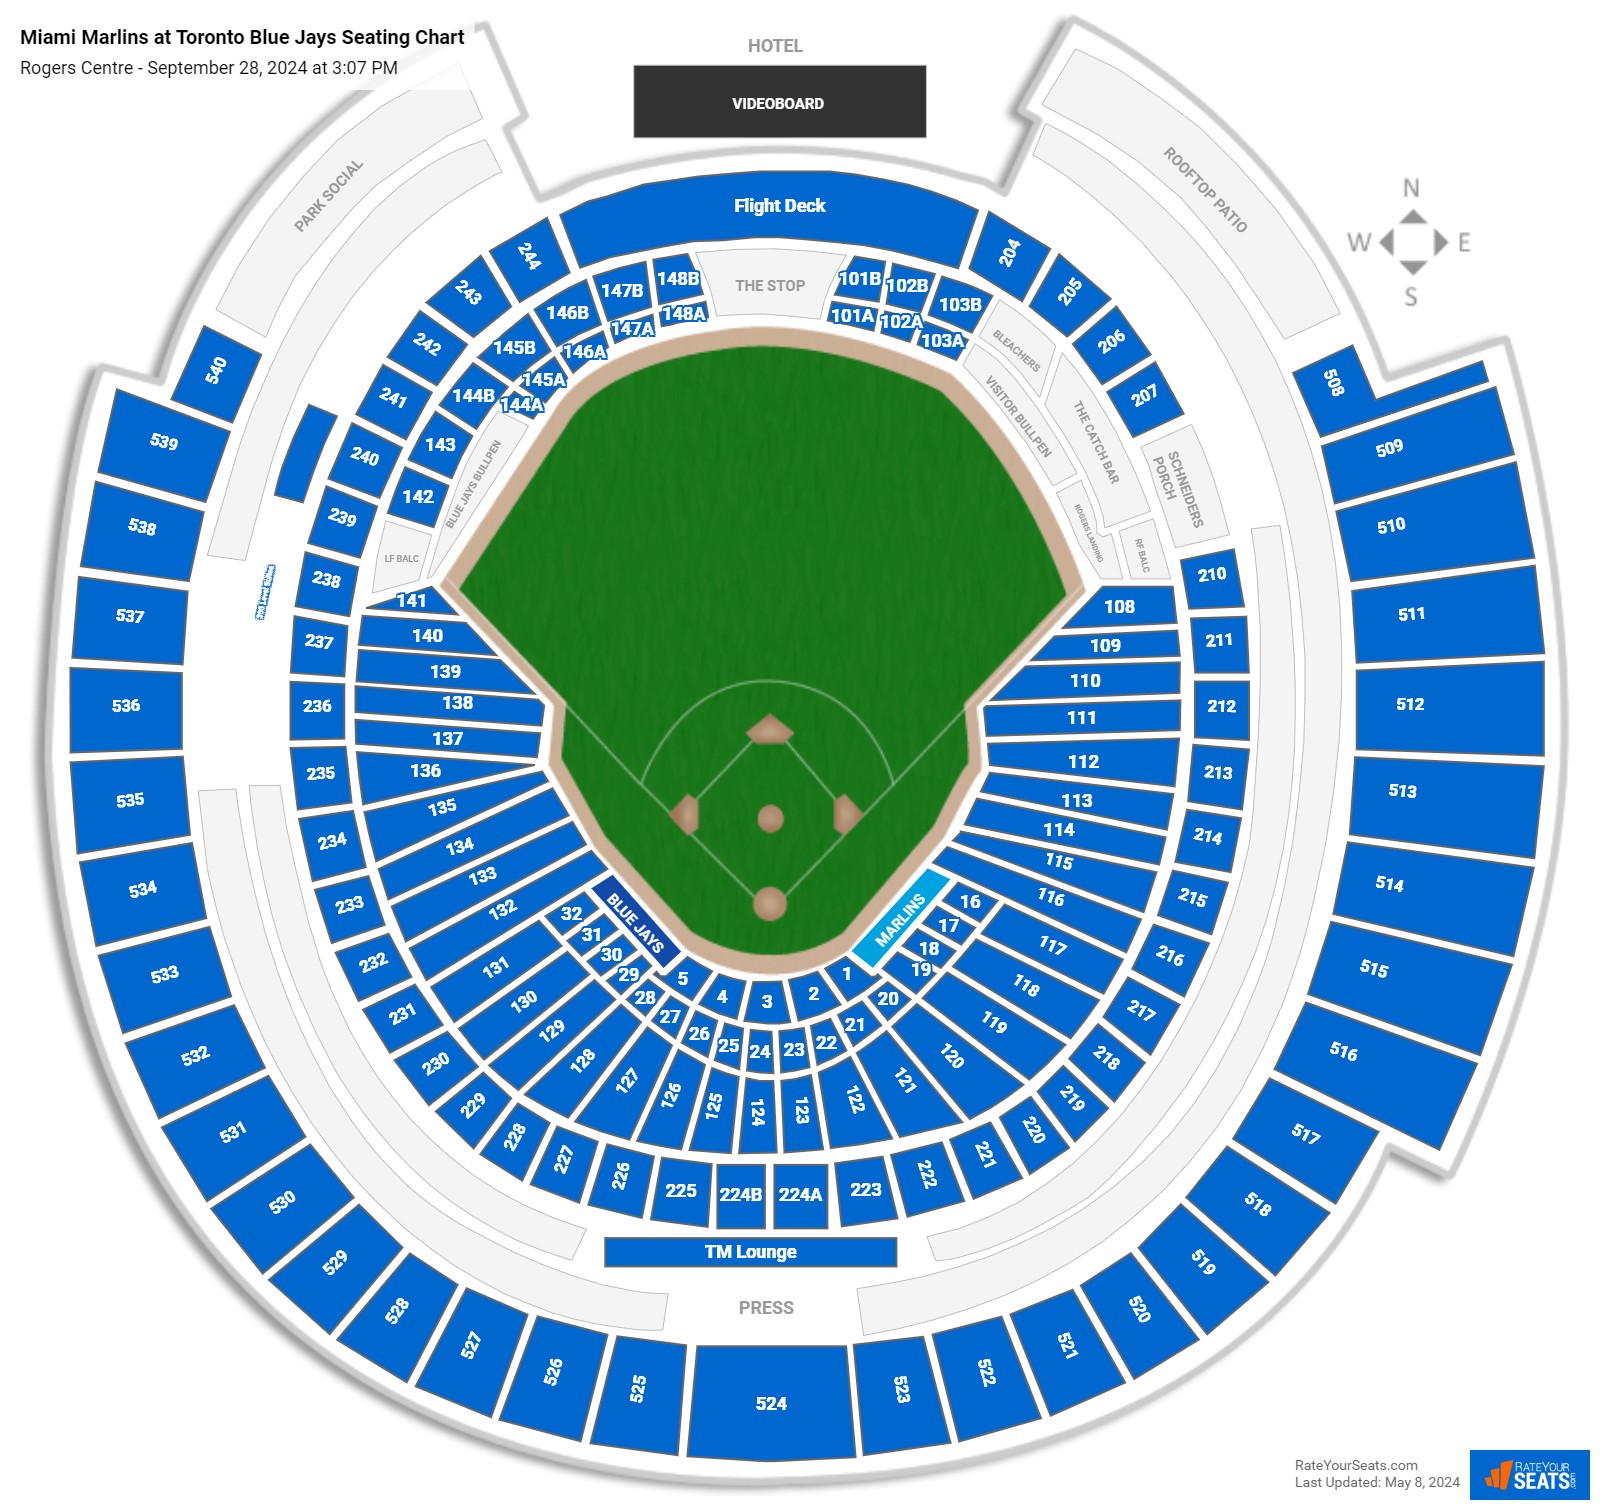 Miami Marlins at Toronto Blue Jays seating chart Rogers Centre